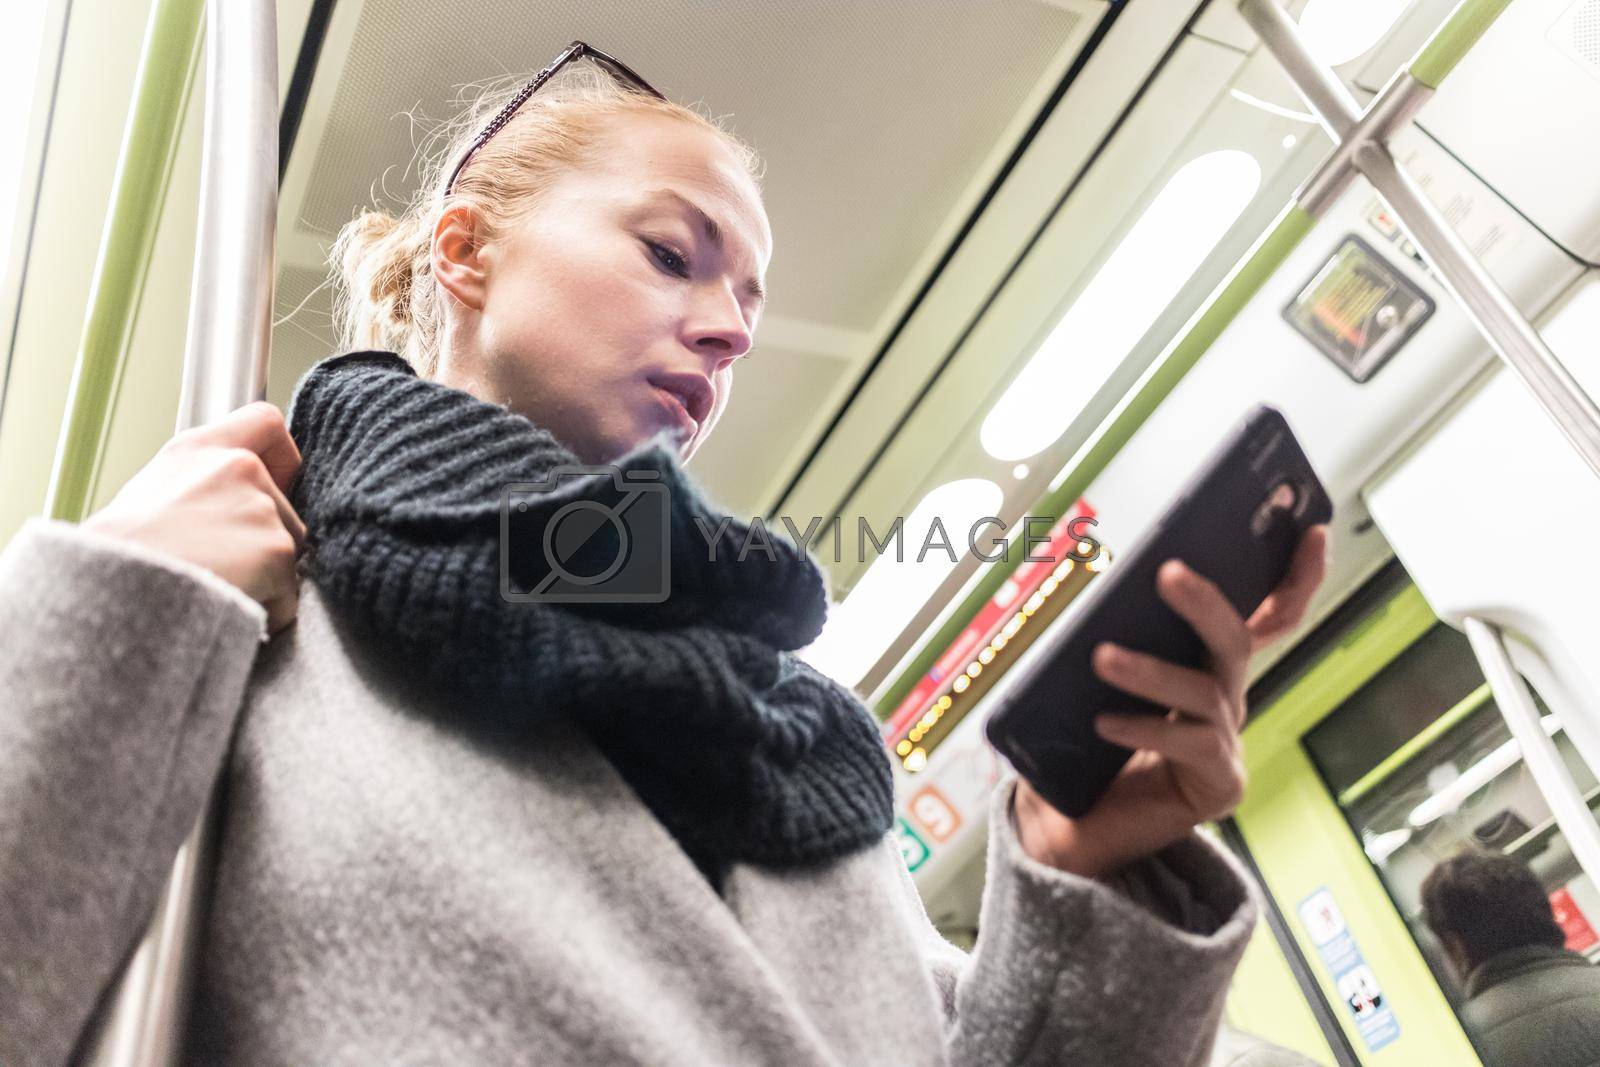 Young woman passenger using smartphone while moving in the modern metro, commuting by public transport.